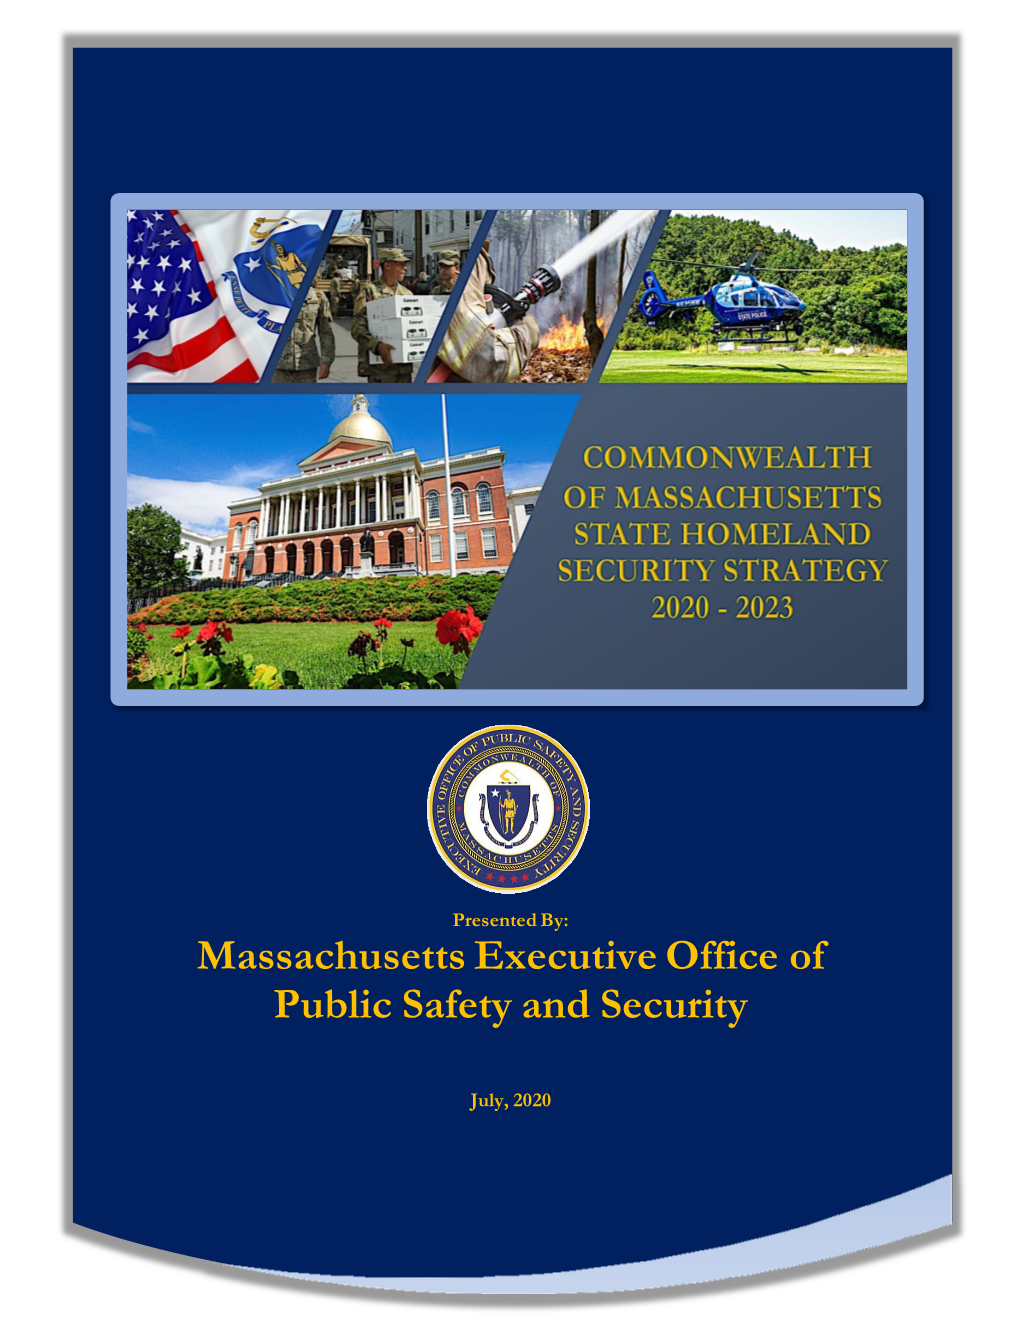 Massachusetts Executive Office of Public Safety and Security